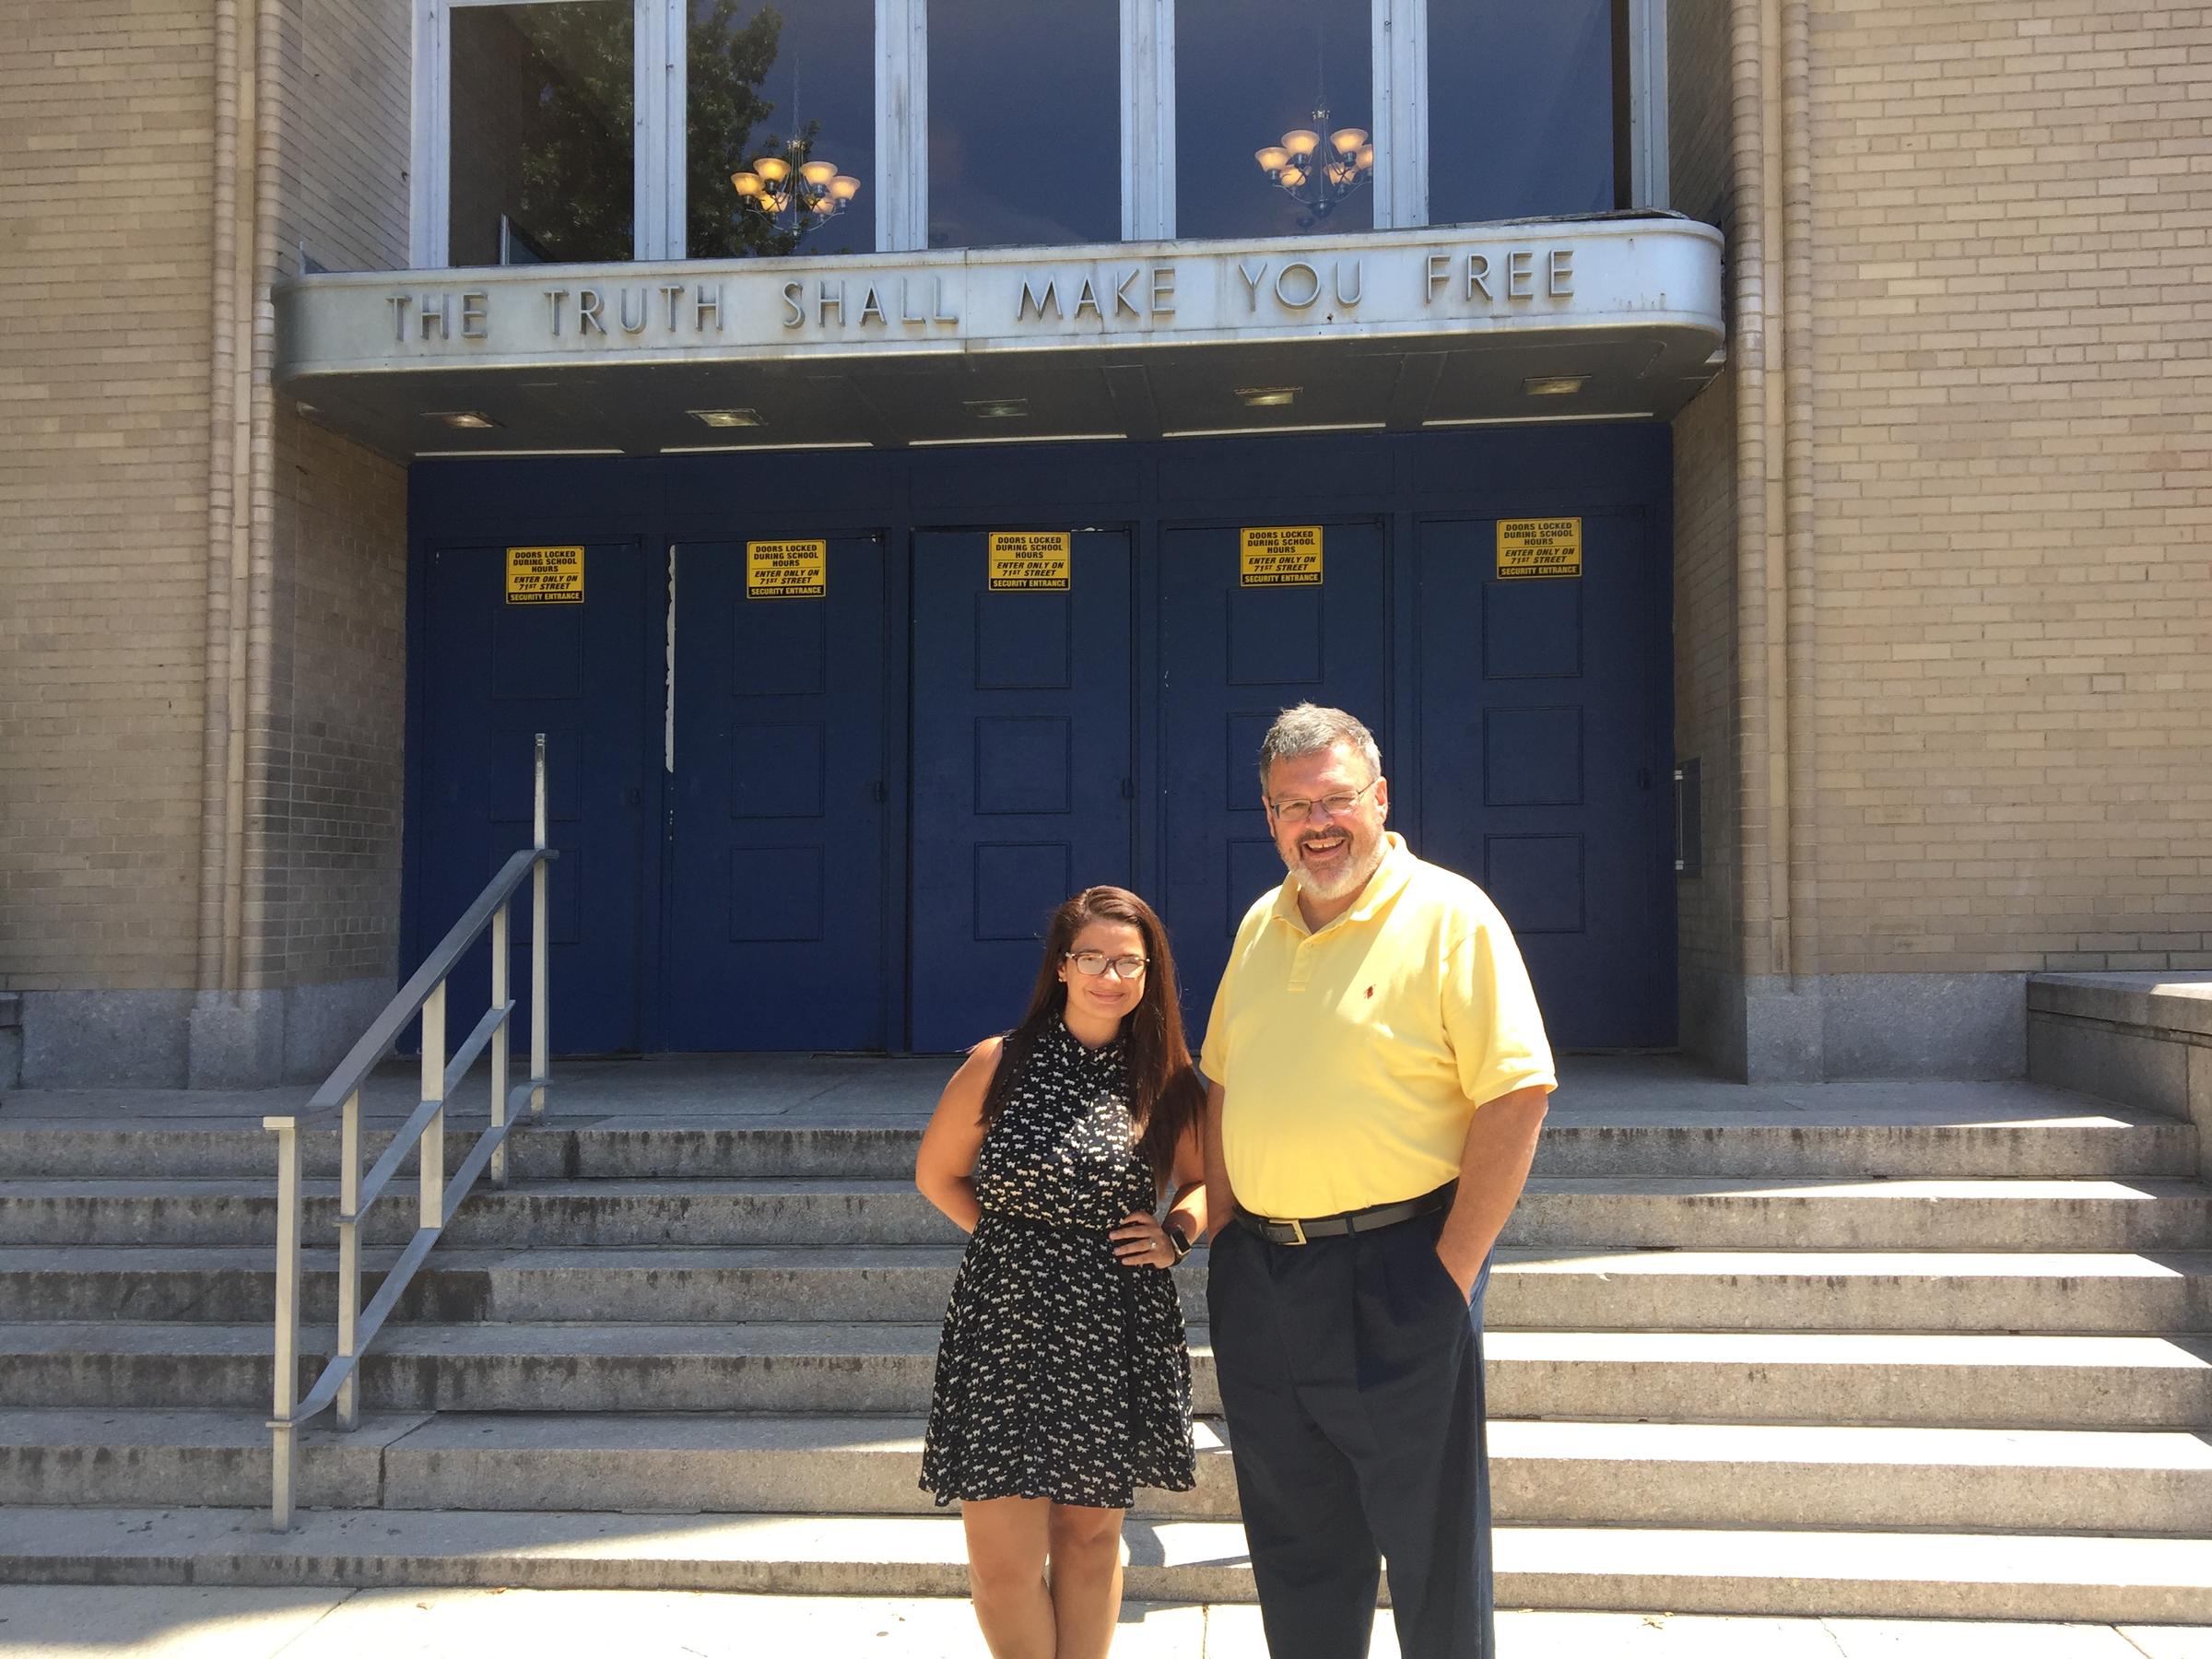 #1407: “A NYC High School Goes Coed After Nearly 60 Years”